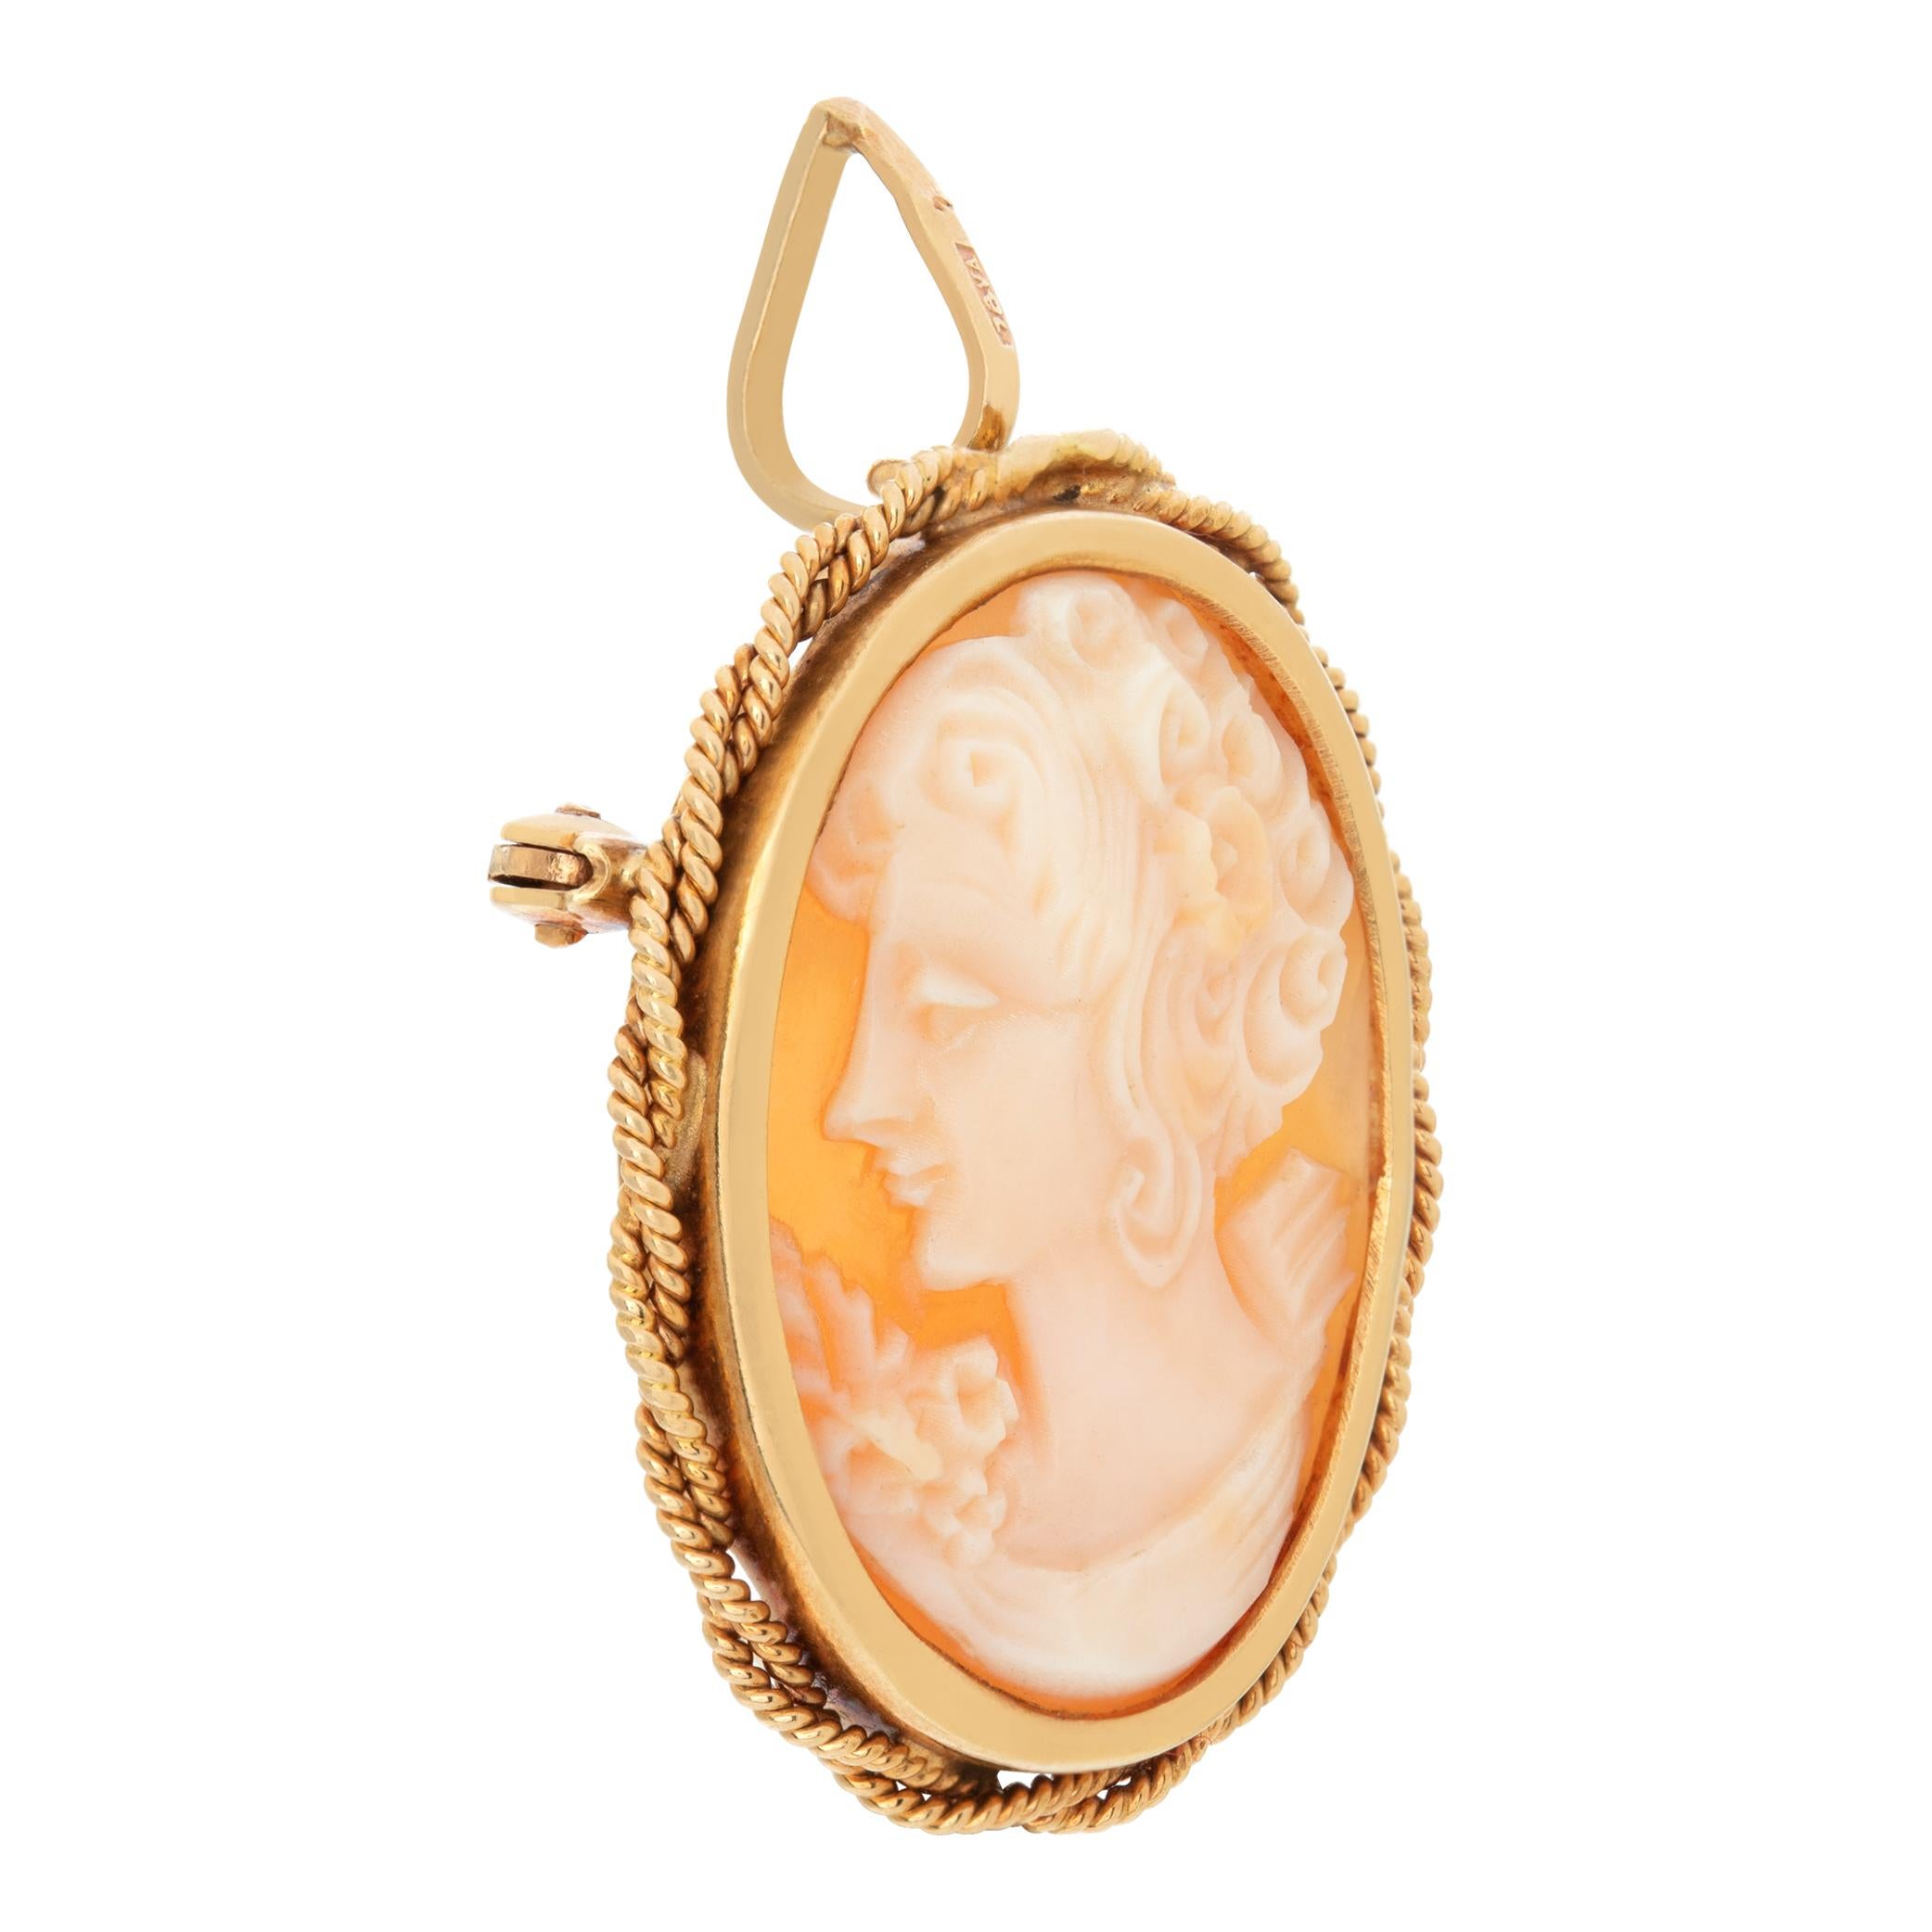 Cameo pin/pendant in 18k yellow gold. 23mm x 29mm (0.875 inch by 1.125 inch)
